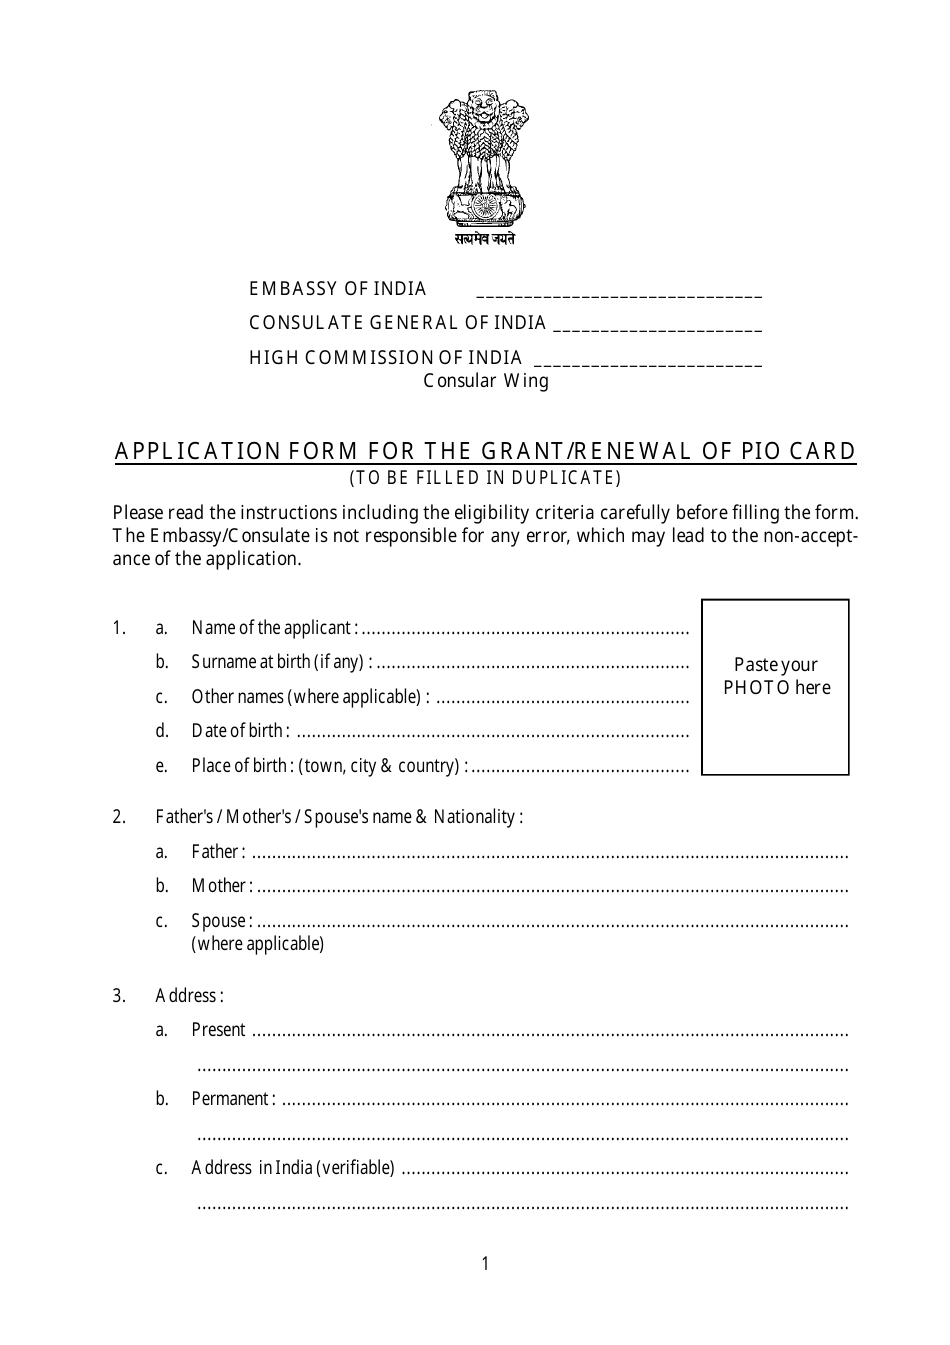 Application Form for the Grant / Renewal of Pio Card - Embassy of India - India, Page 1